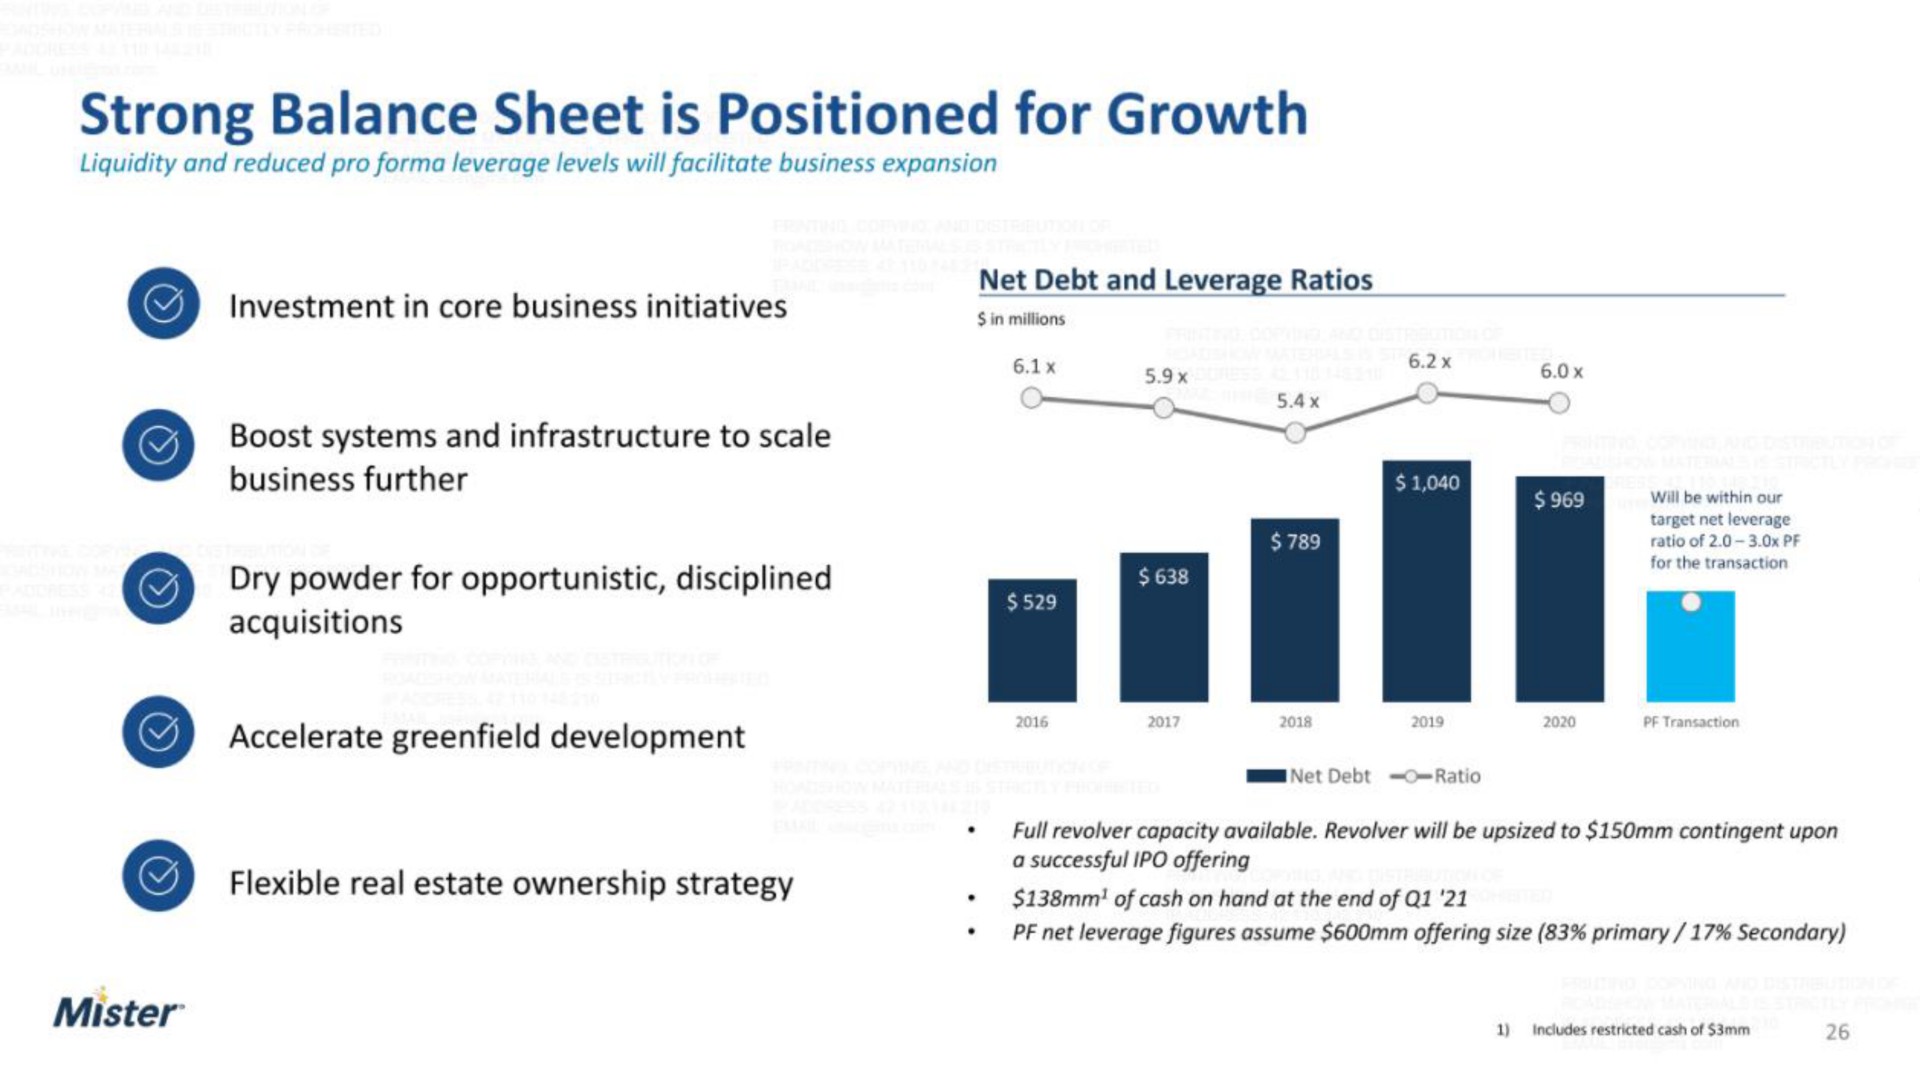 strong balance sheet is positioned for growth business further flexible real estate ownership strategy mister | Mister